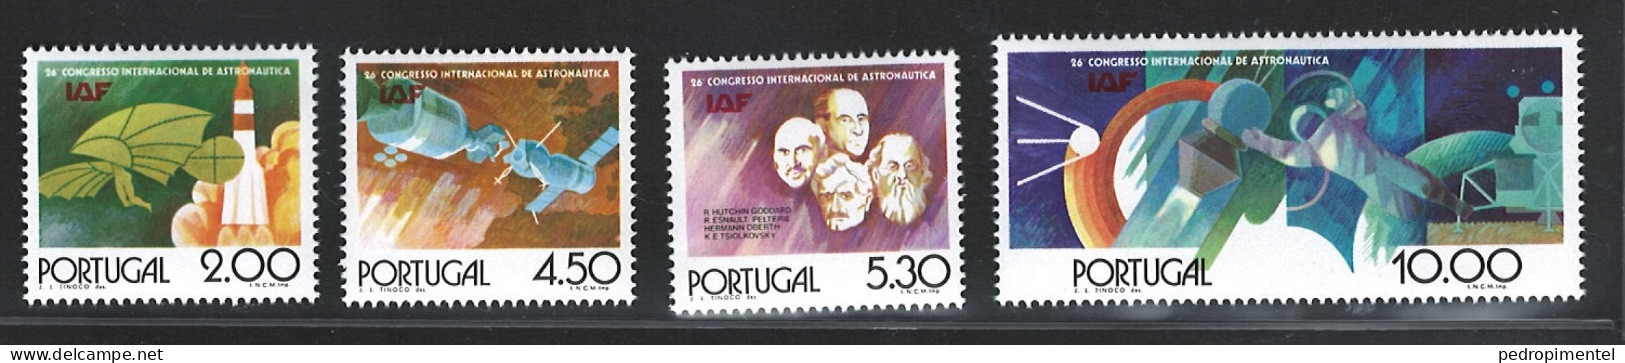 Portugal Stamps 1975 "International Astronautical Federation" Condition MNH #1261-1264 - Unused Stamps